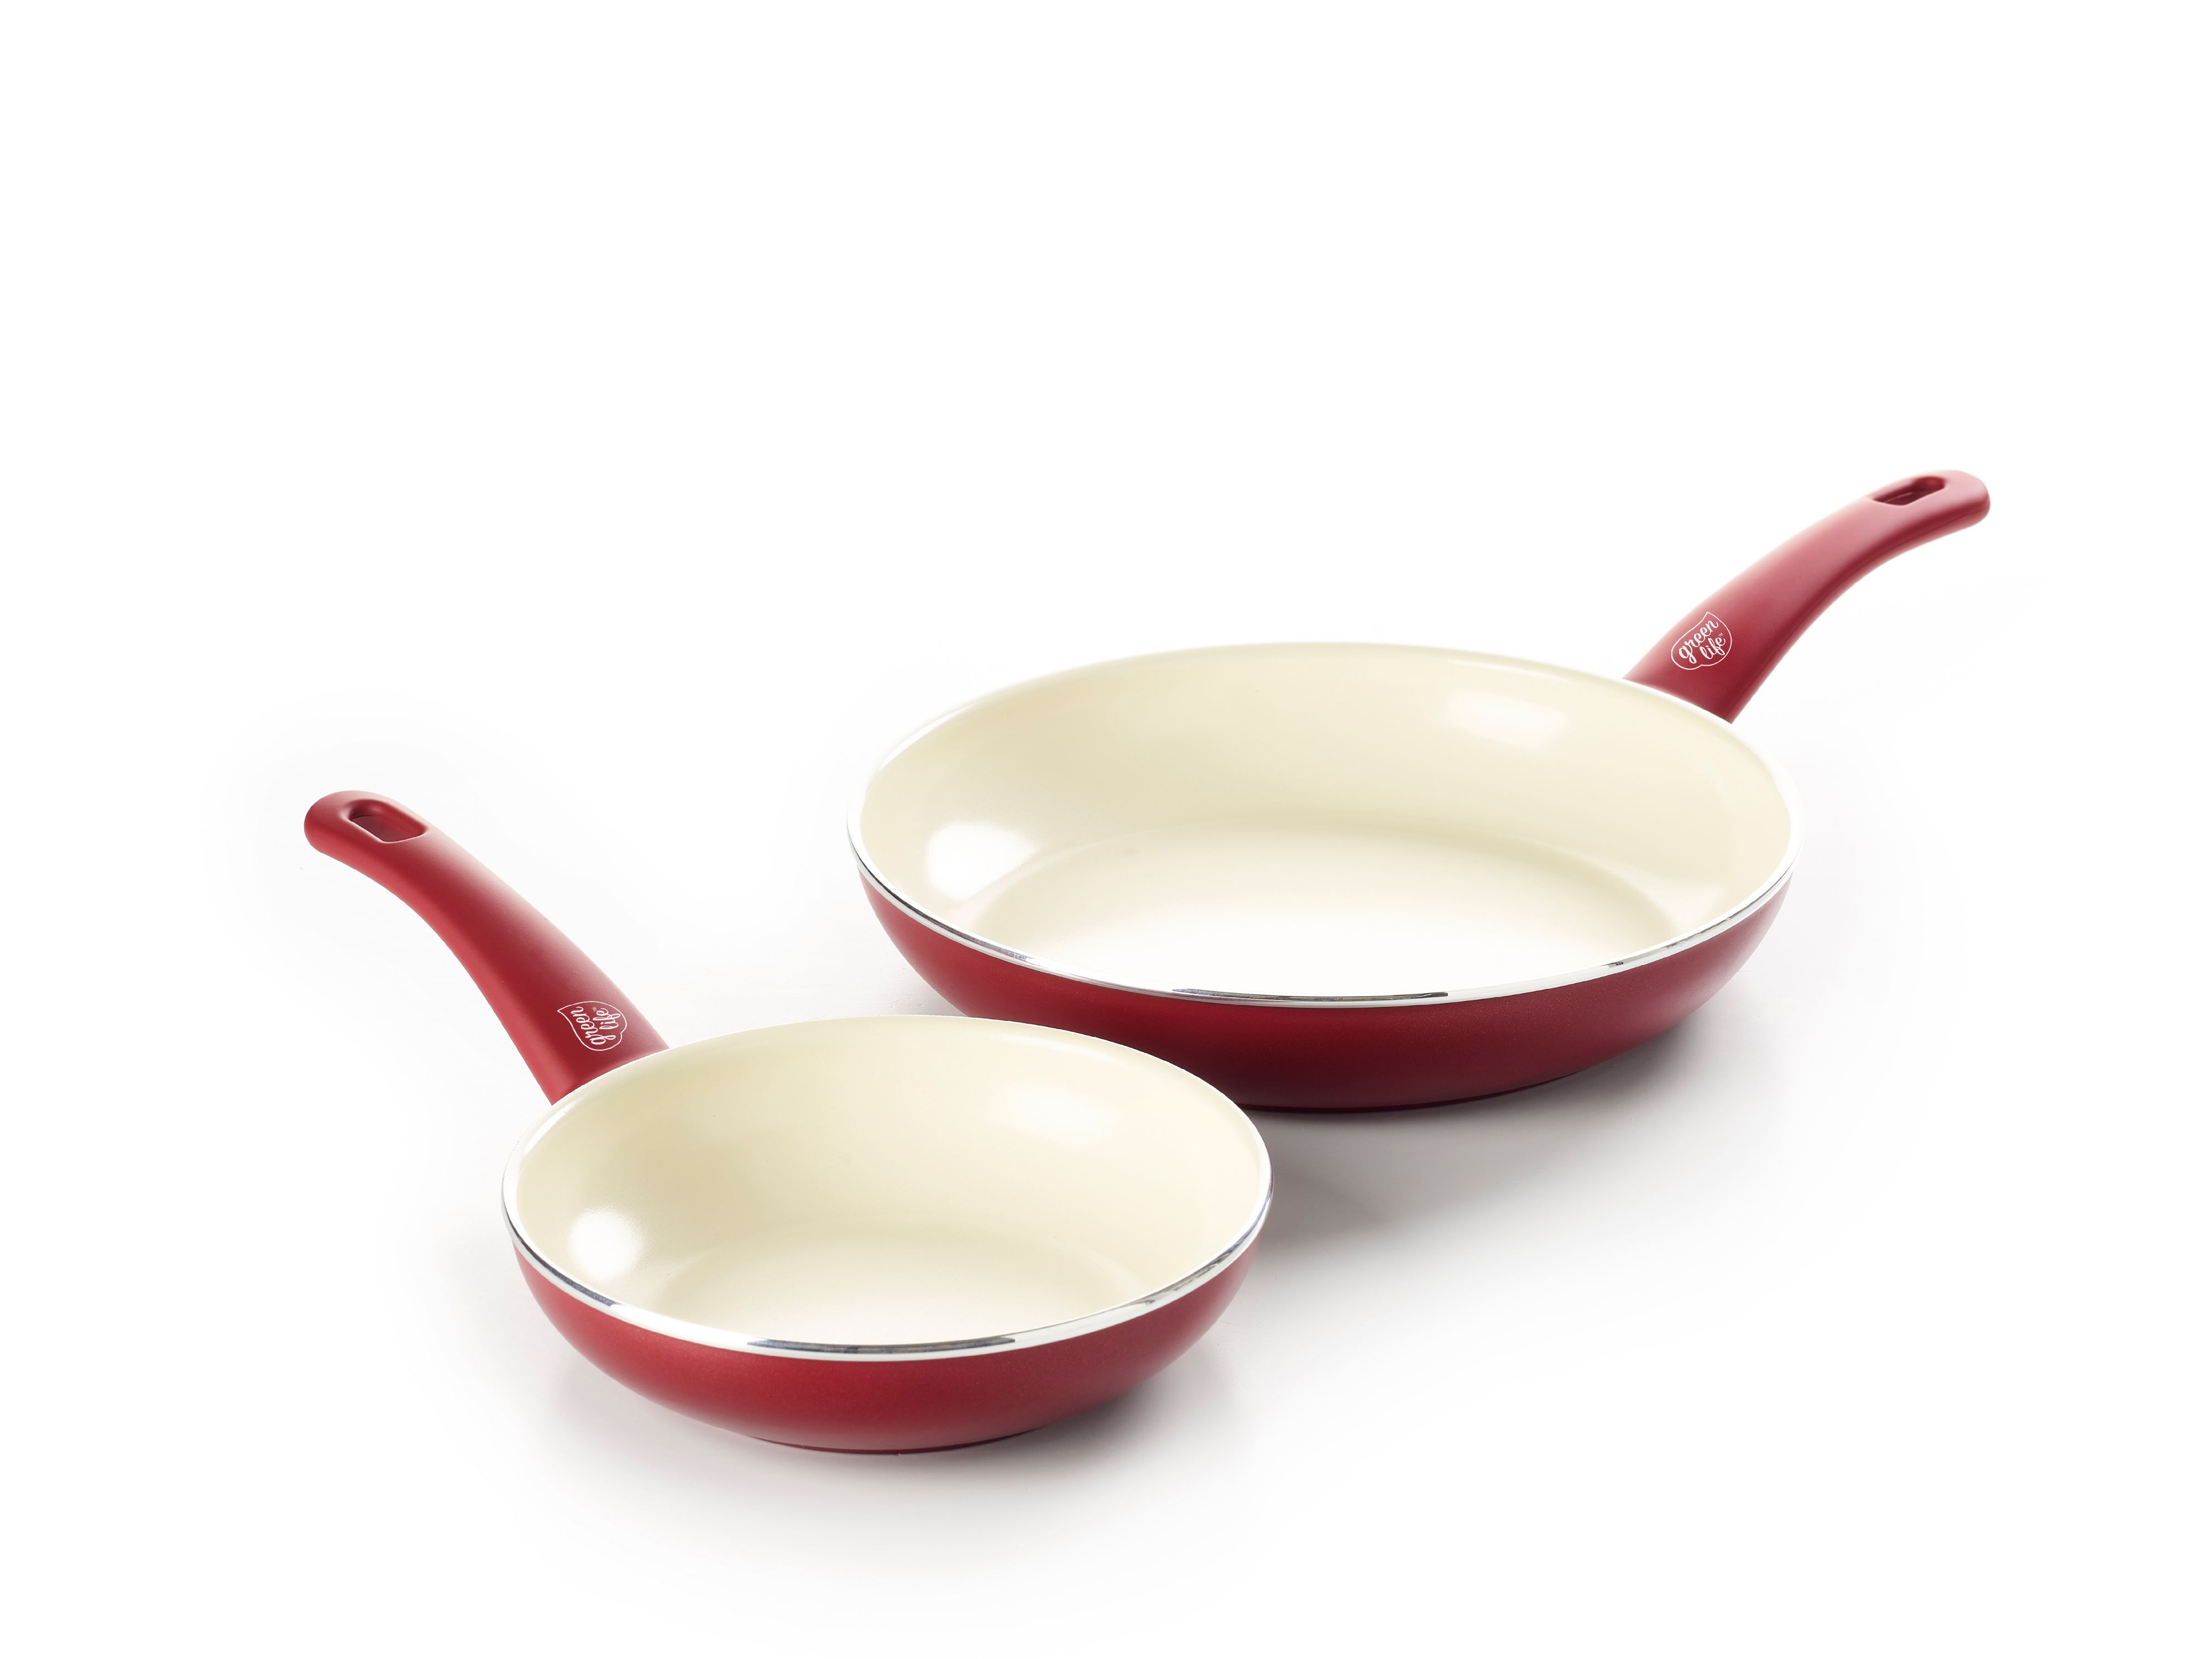 GreenLife Ceramic Non-Stick 7" and 10" 2 Piece Fry Pan Set - image 1 of 8